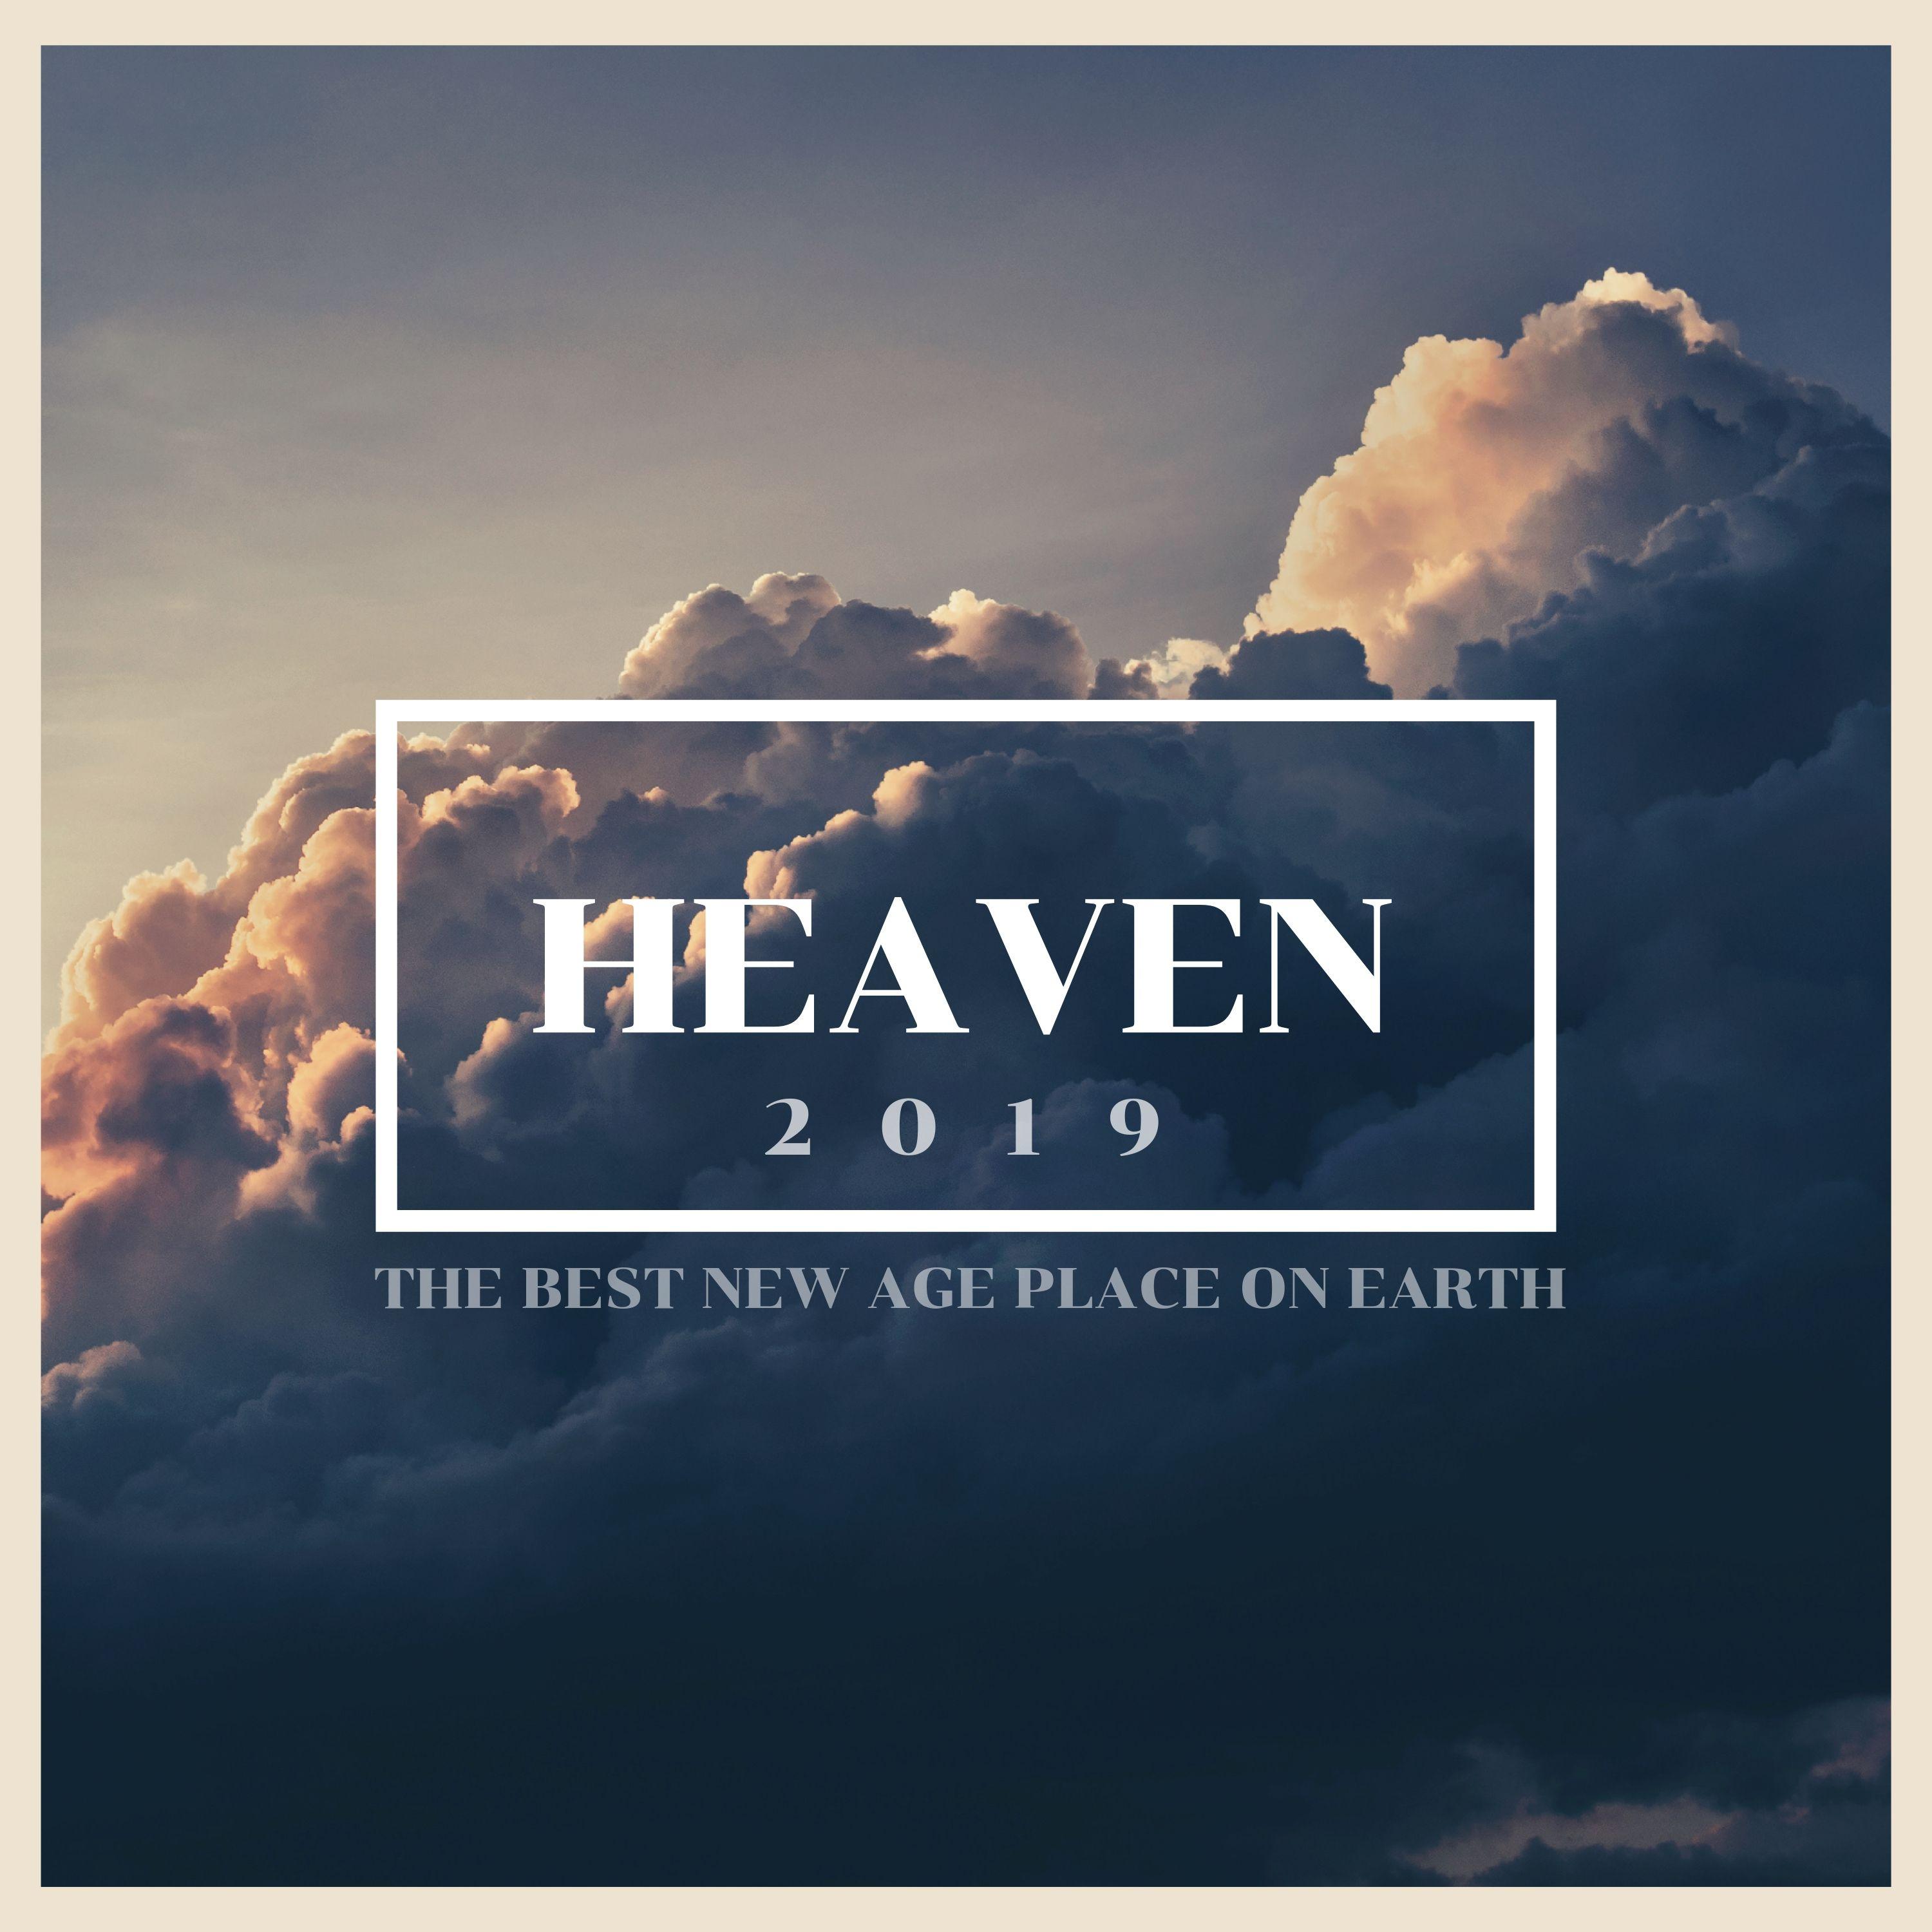 Heaven 2019 - The Best New Age Place on Earth